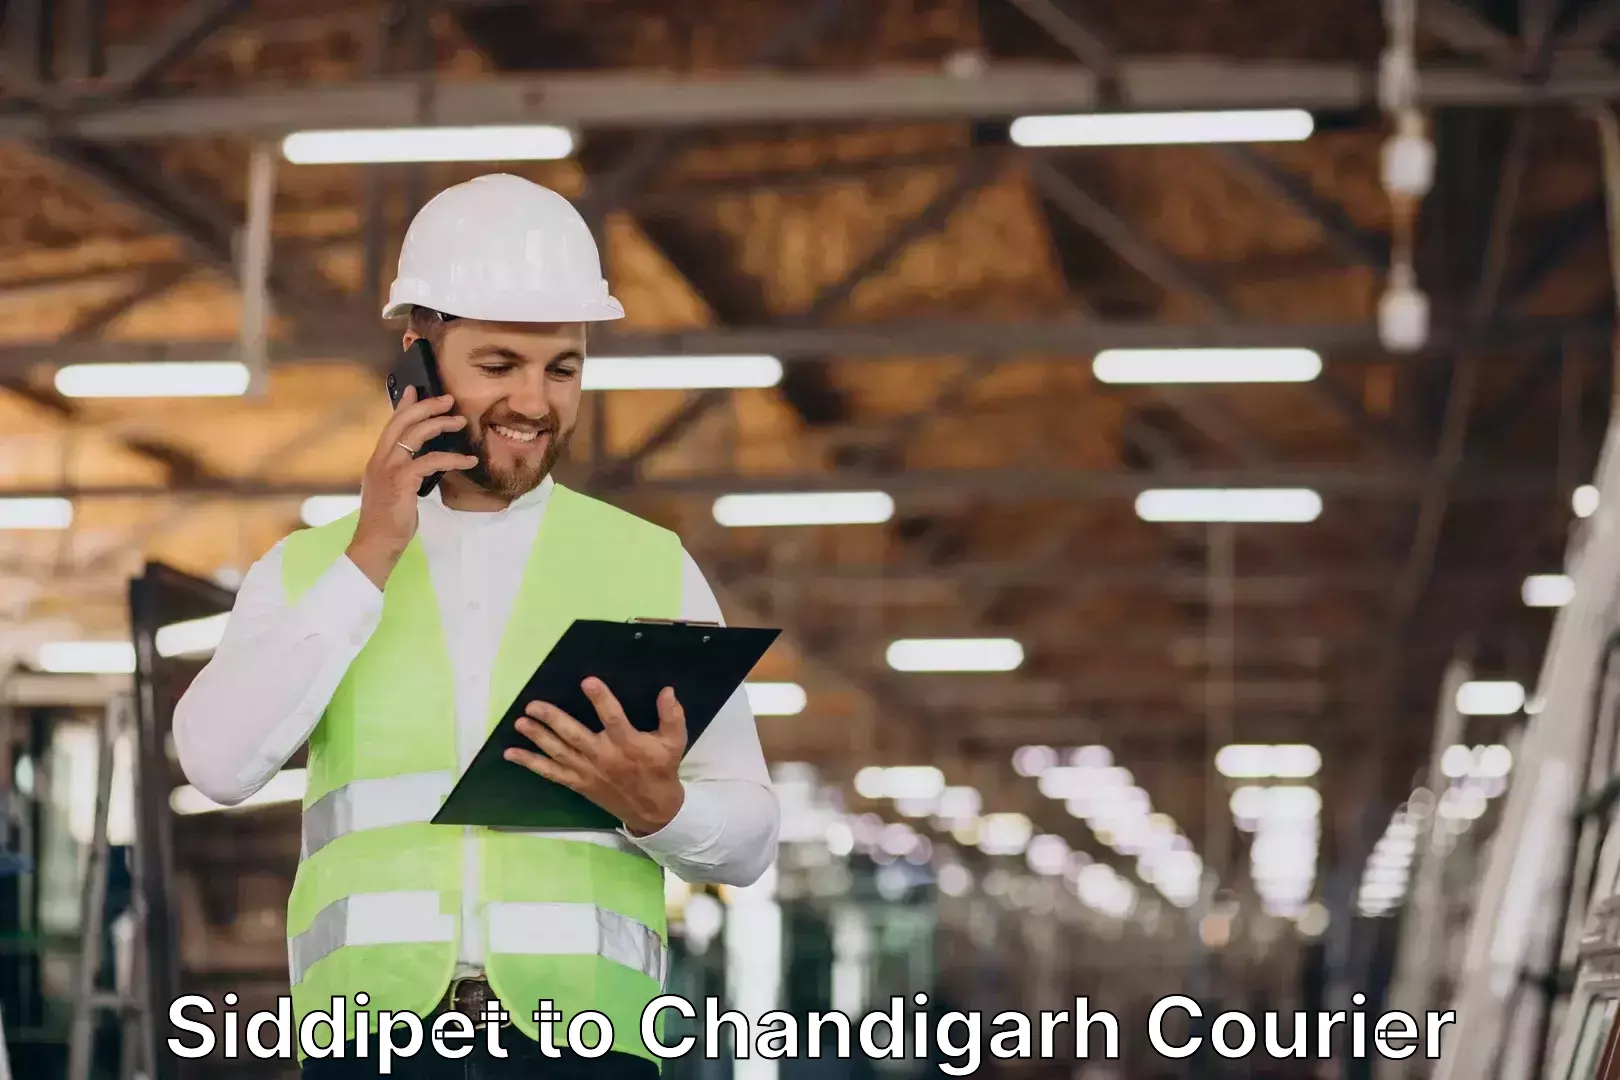 Luggage transfer service Siddipet to Chandigarh